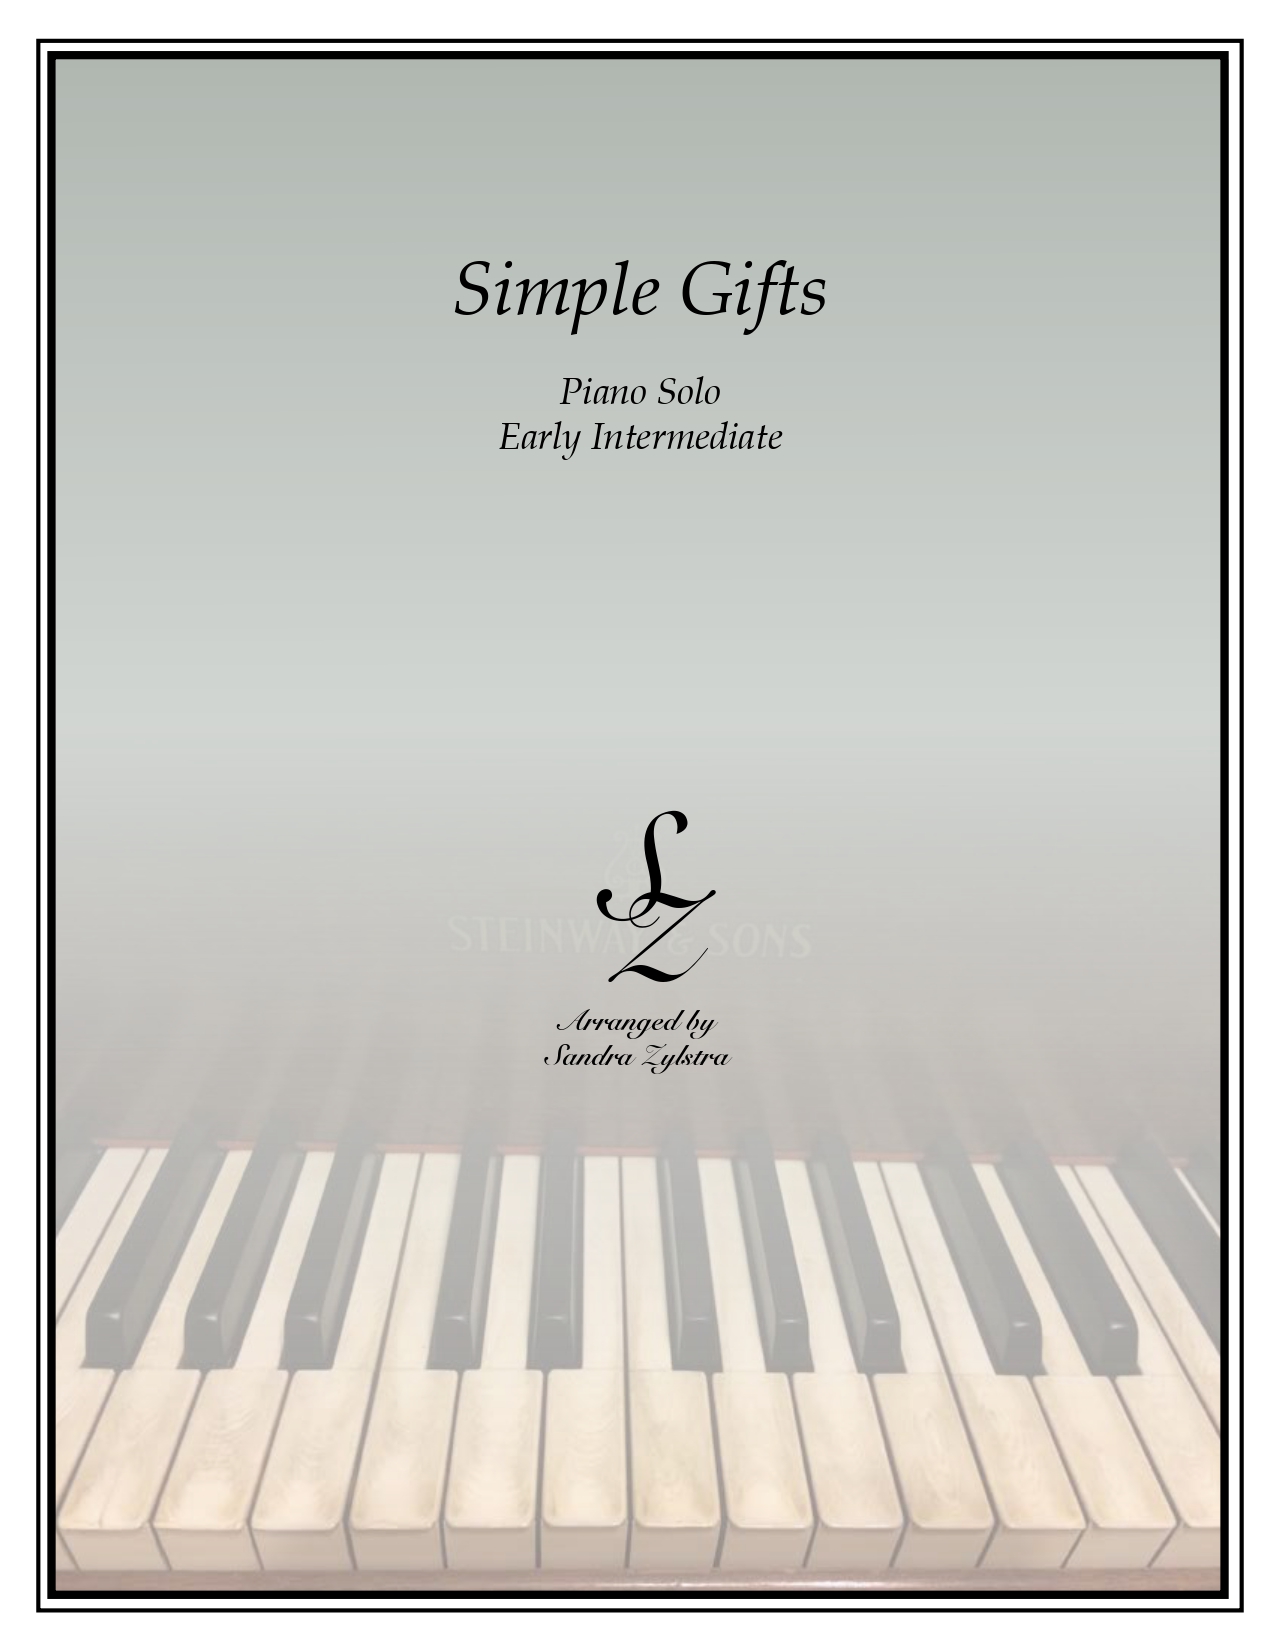 Simple Gifts early intermediate piano cover page 00011